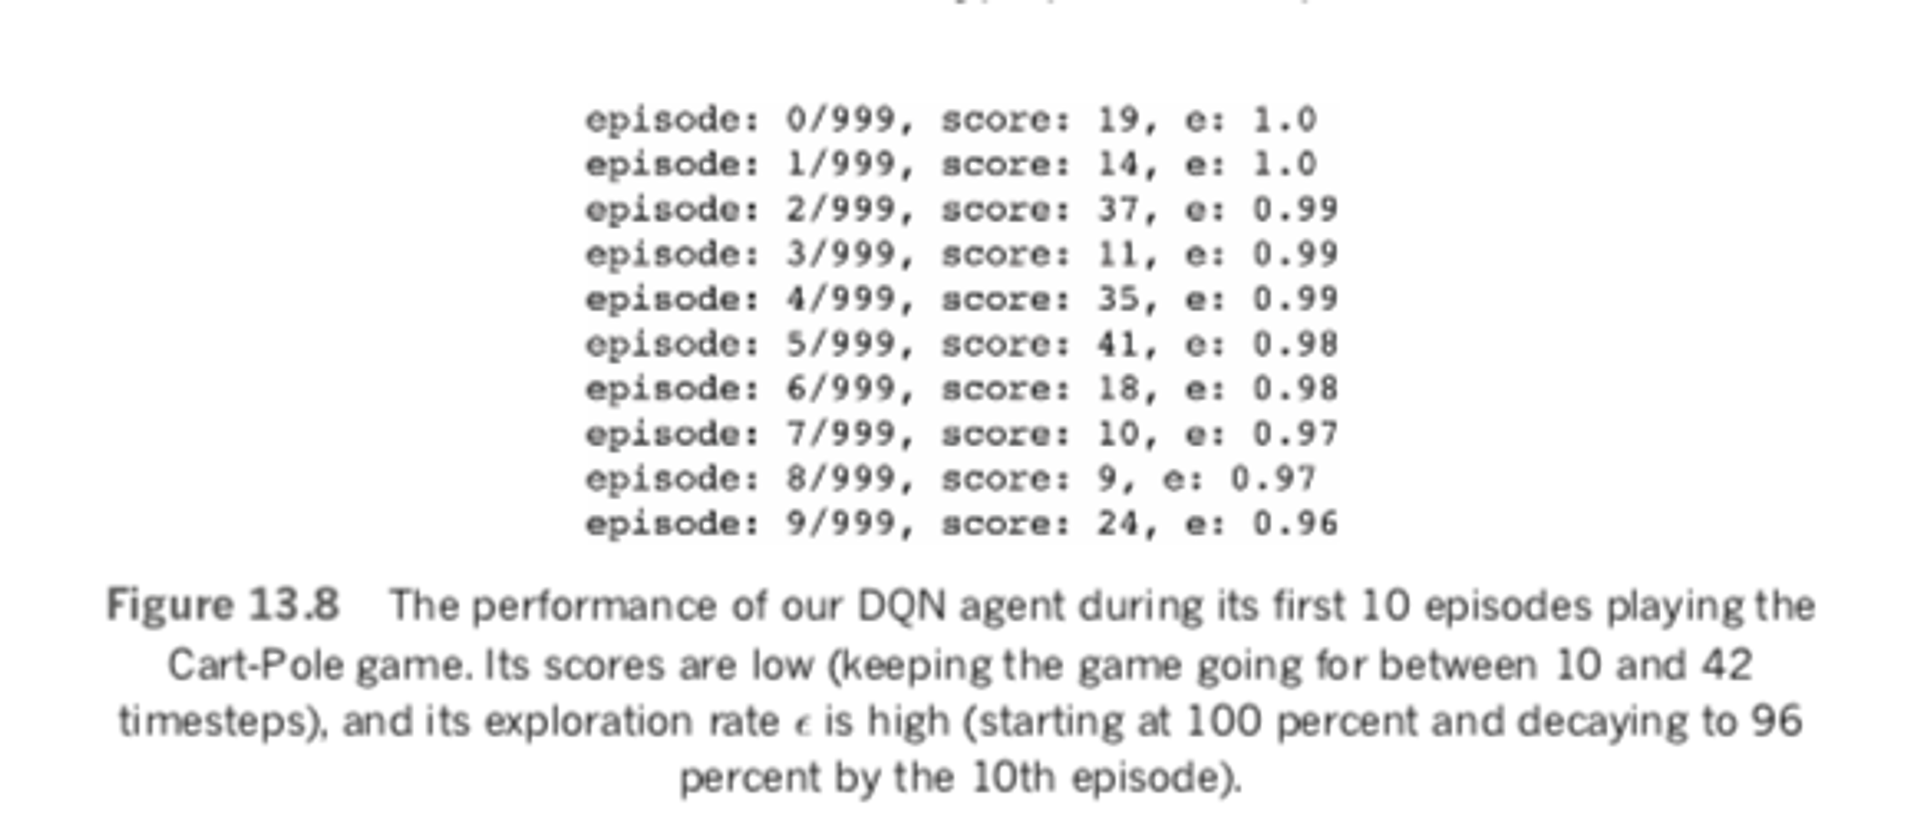 Performance of DQN agent during its first 10 episodes